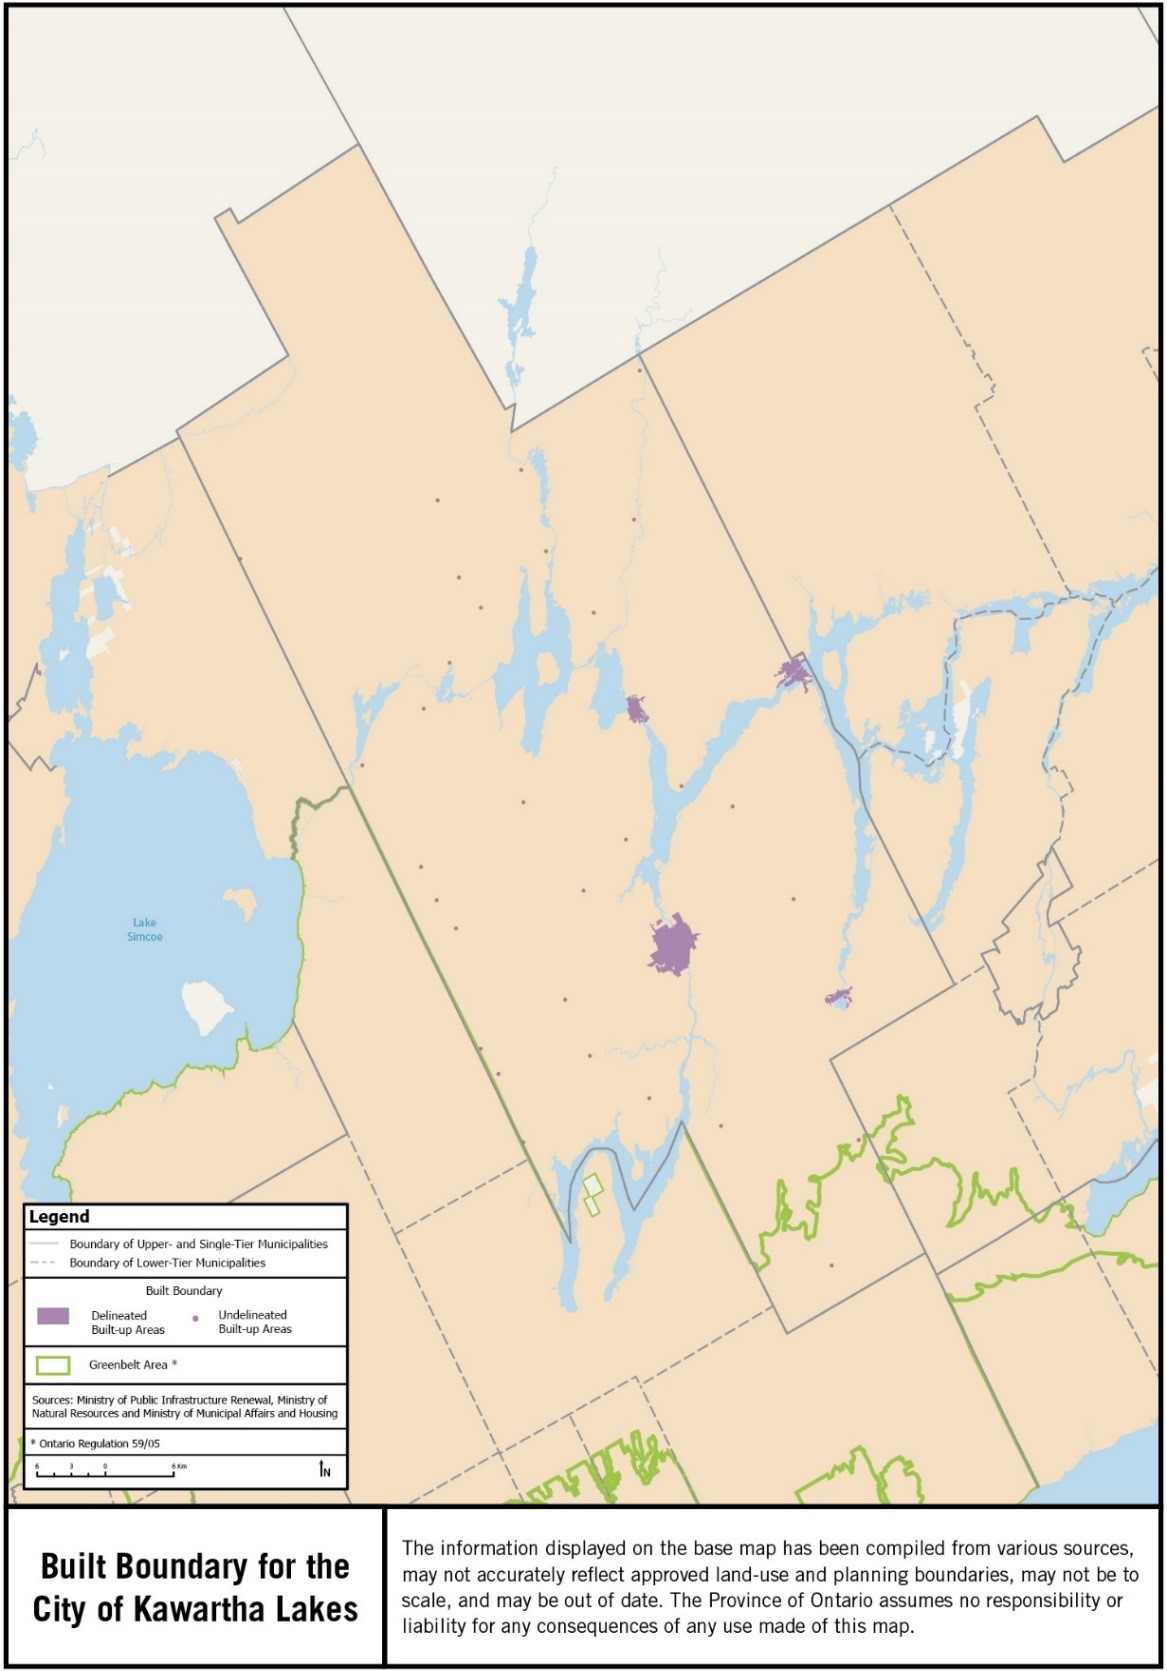 Map showing the built boundary for the City of Kawartha Lakes.